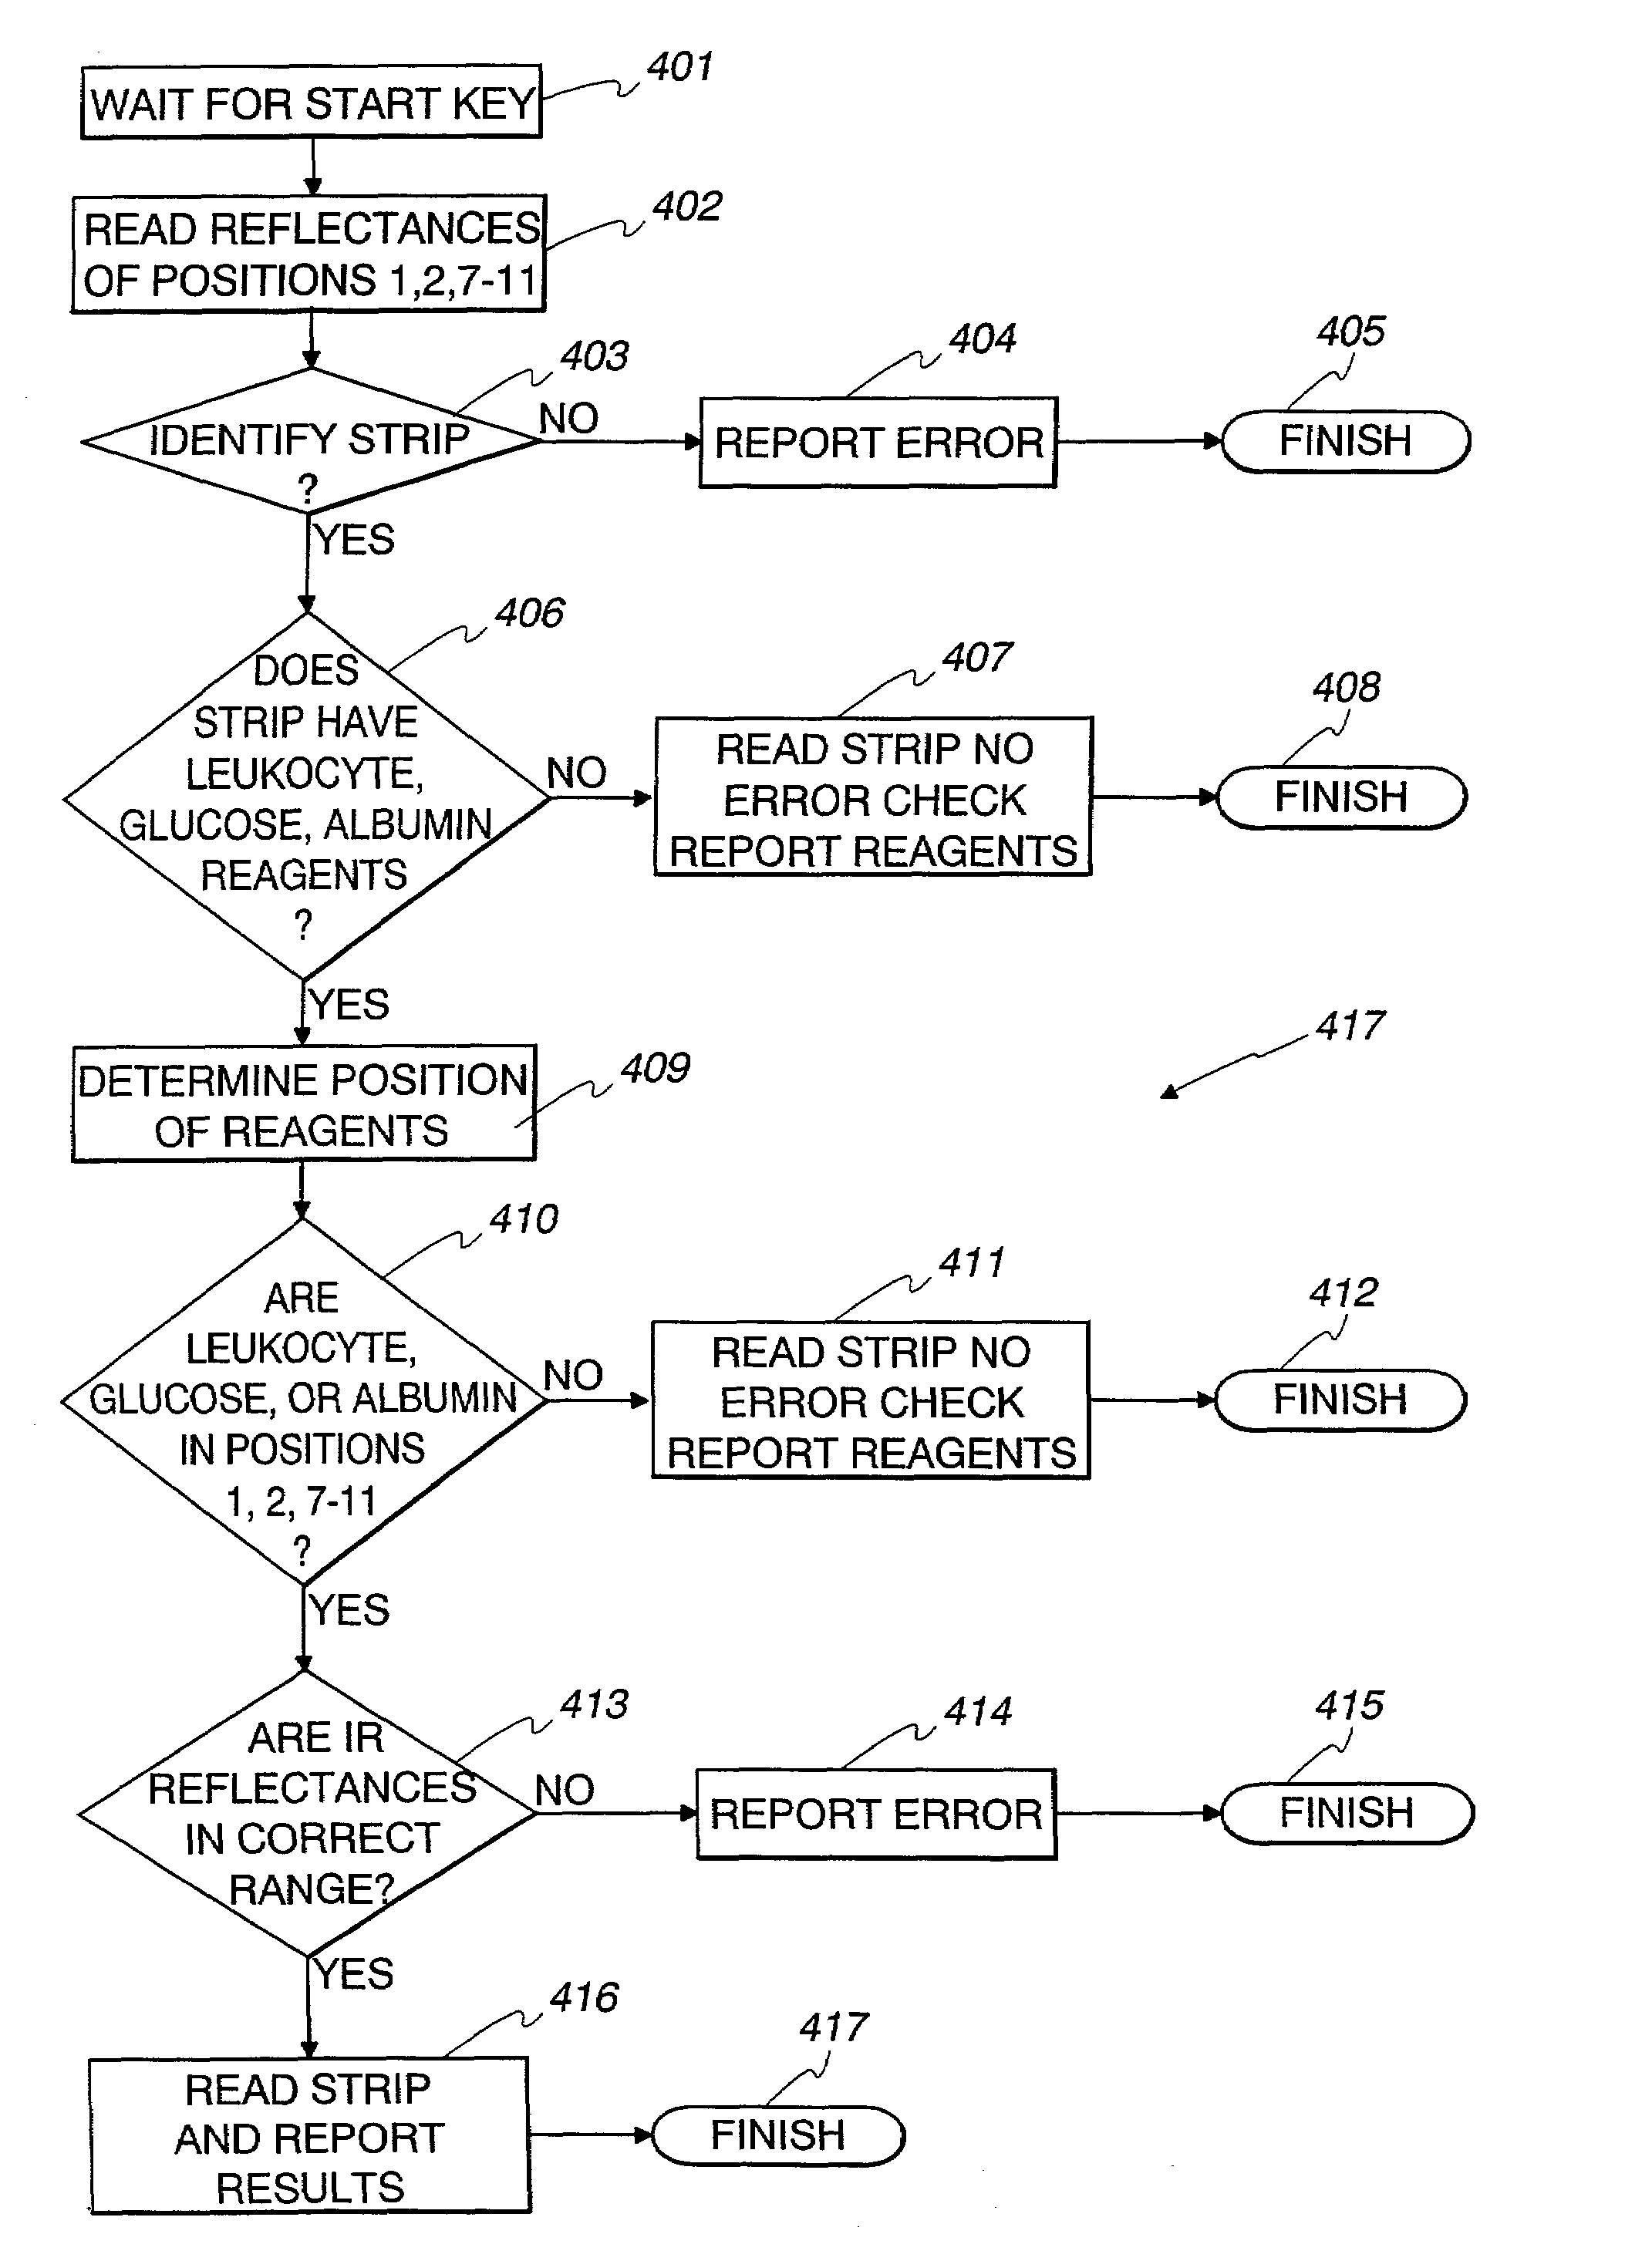 Method and apparatus for using infrared readings to detect misidentification of a diagnostic test strip in a reflectance spectrometer